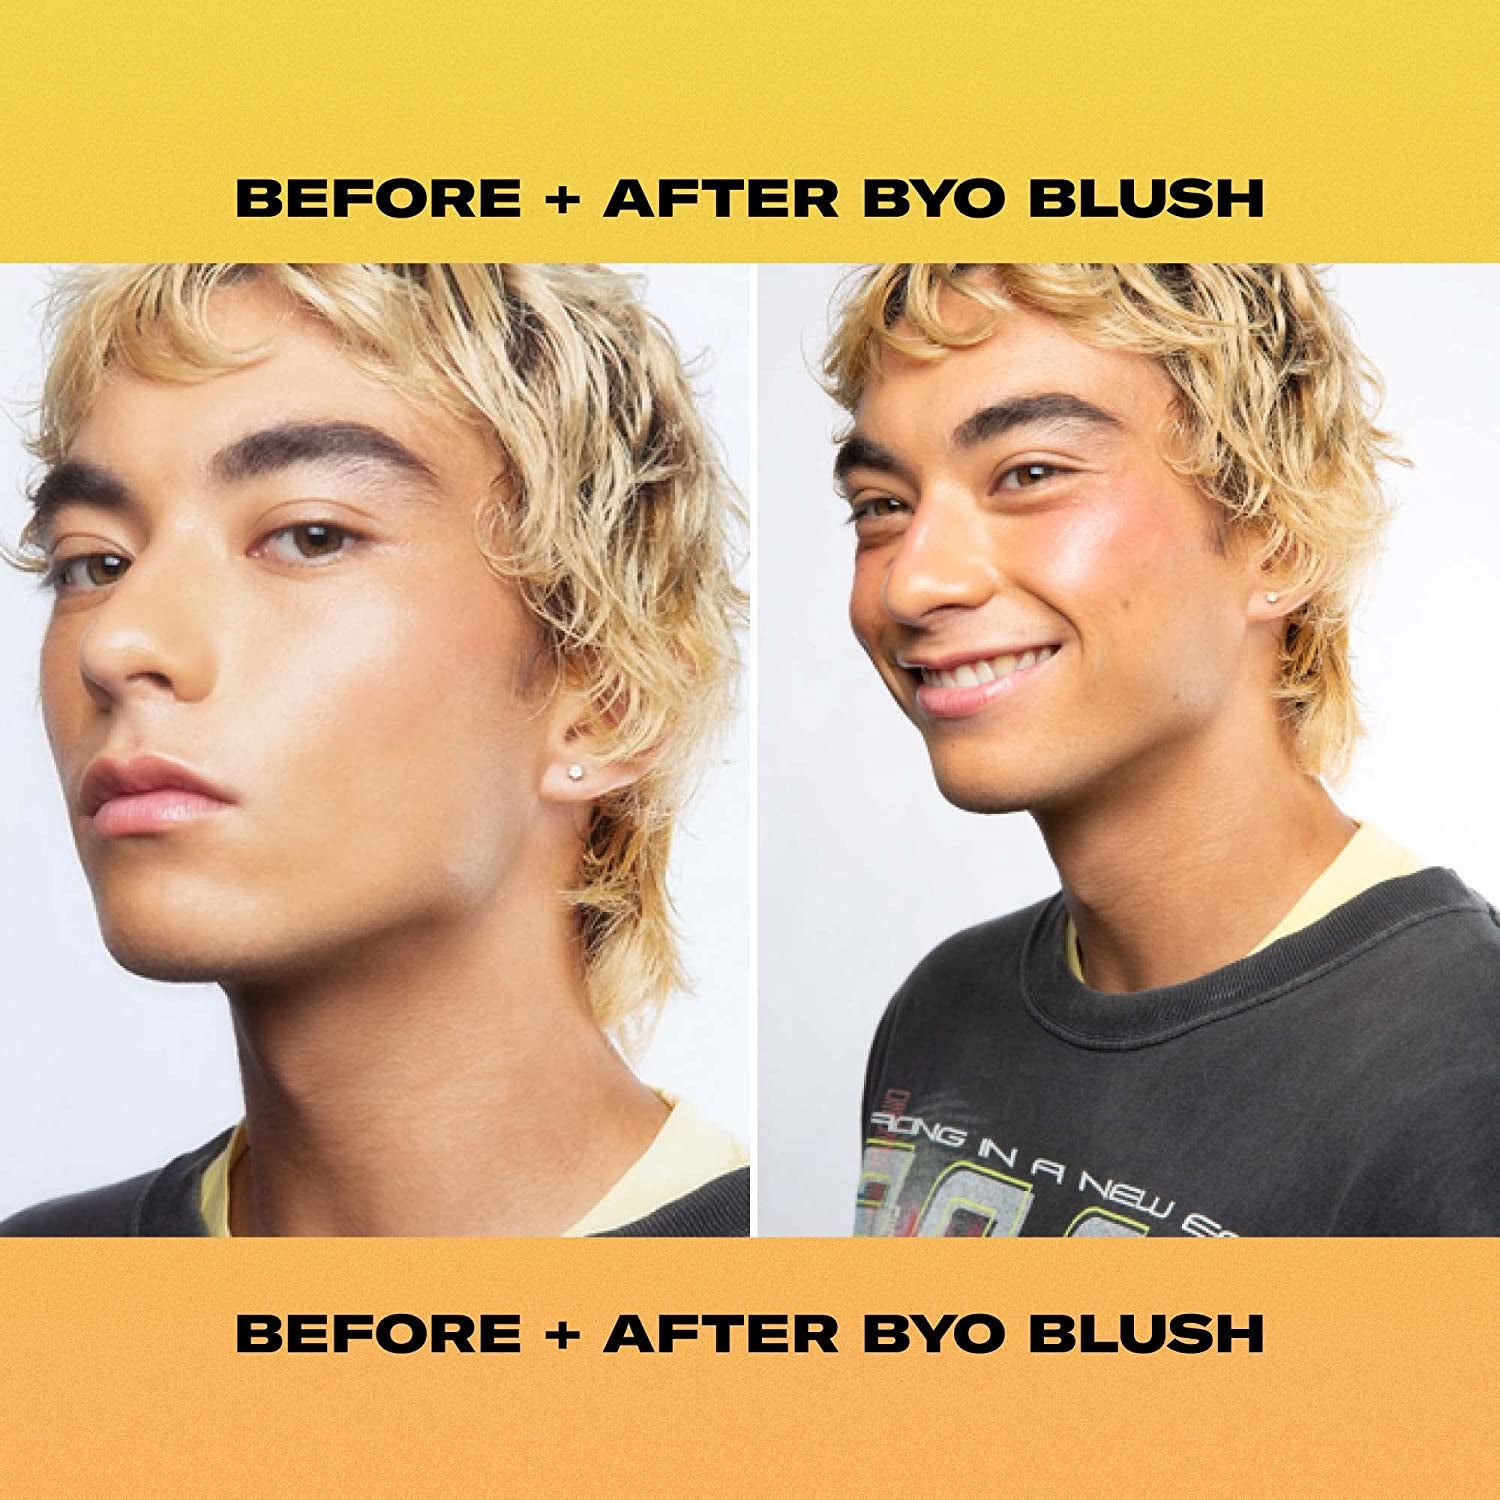 model's without and then with the blush